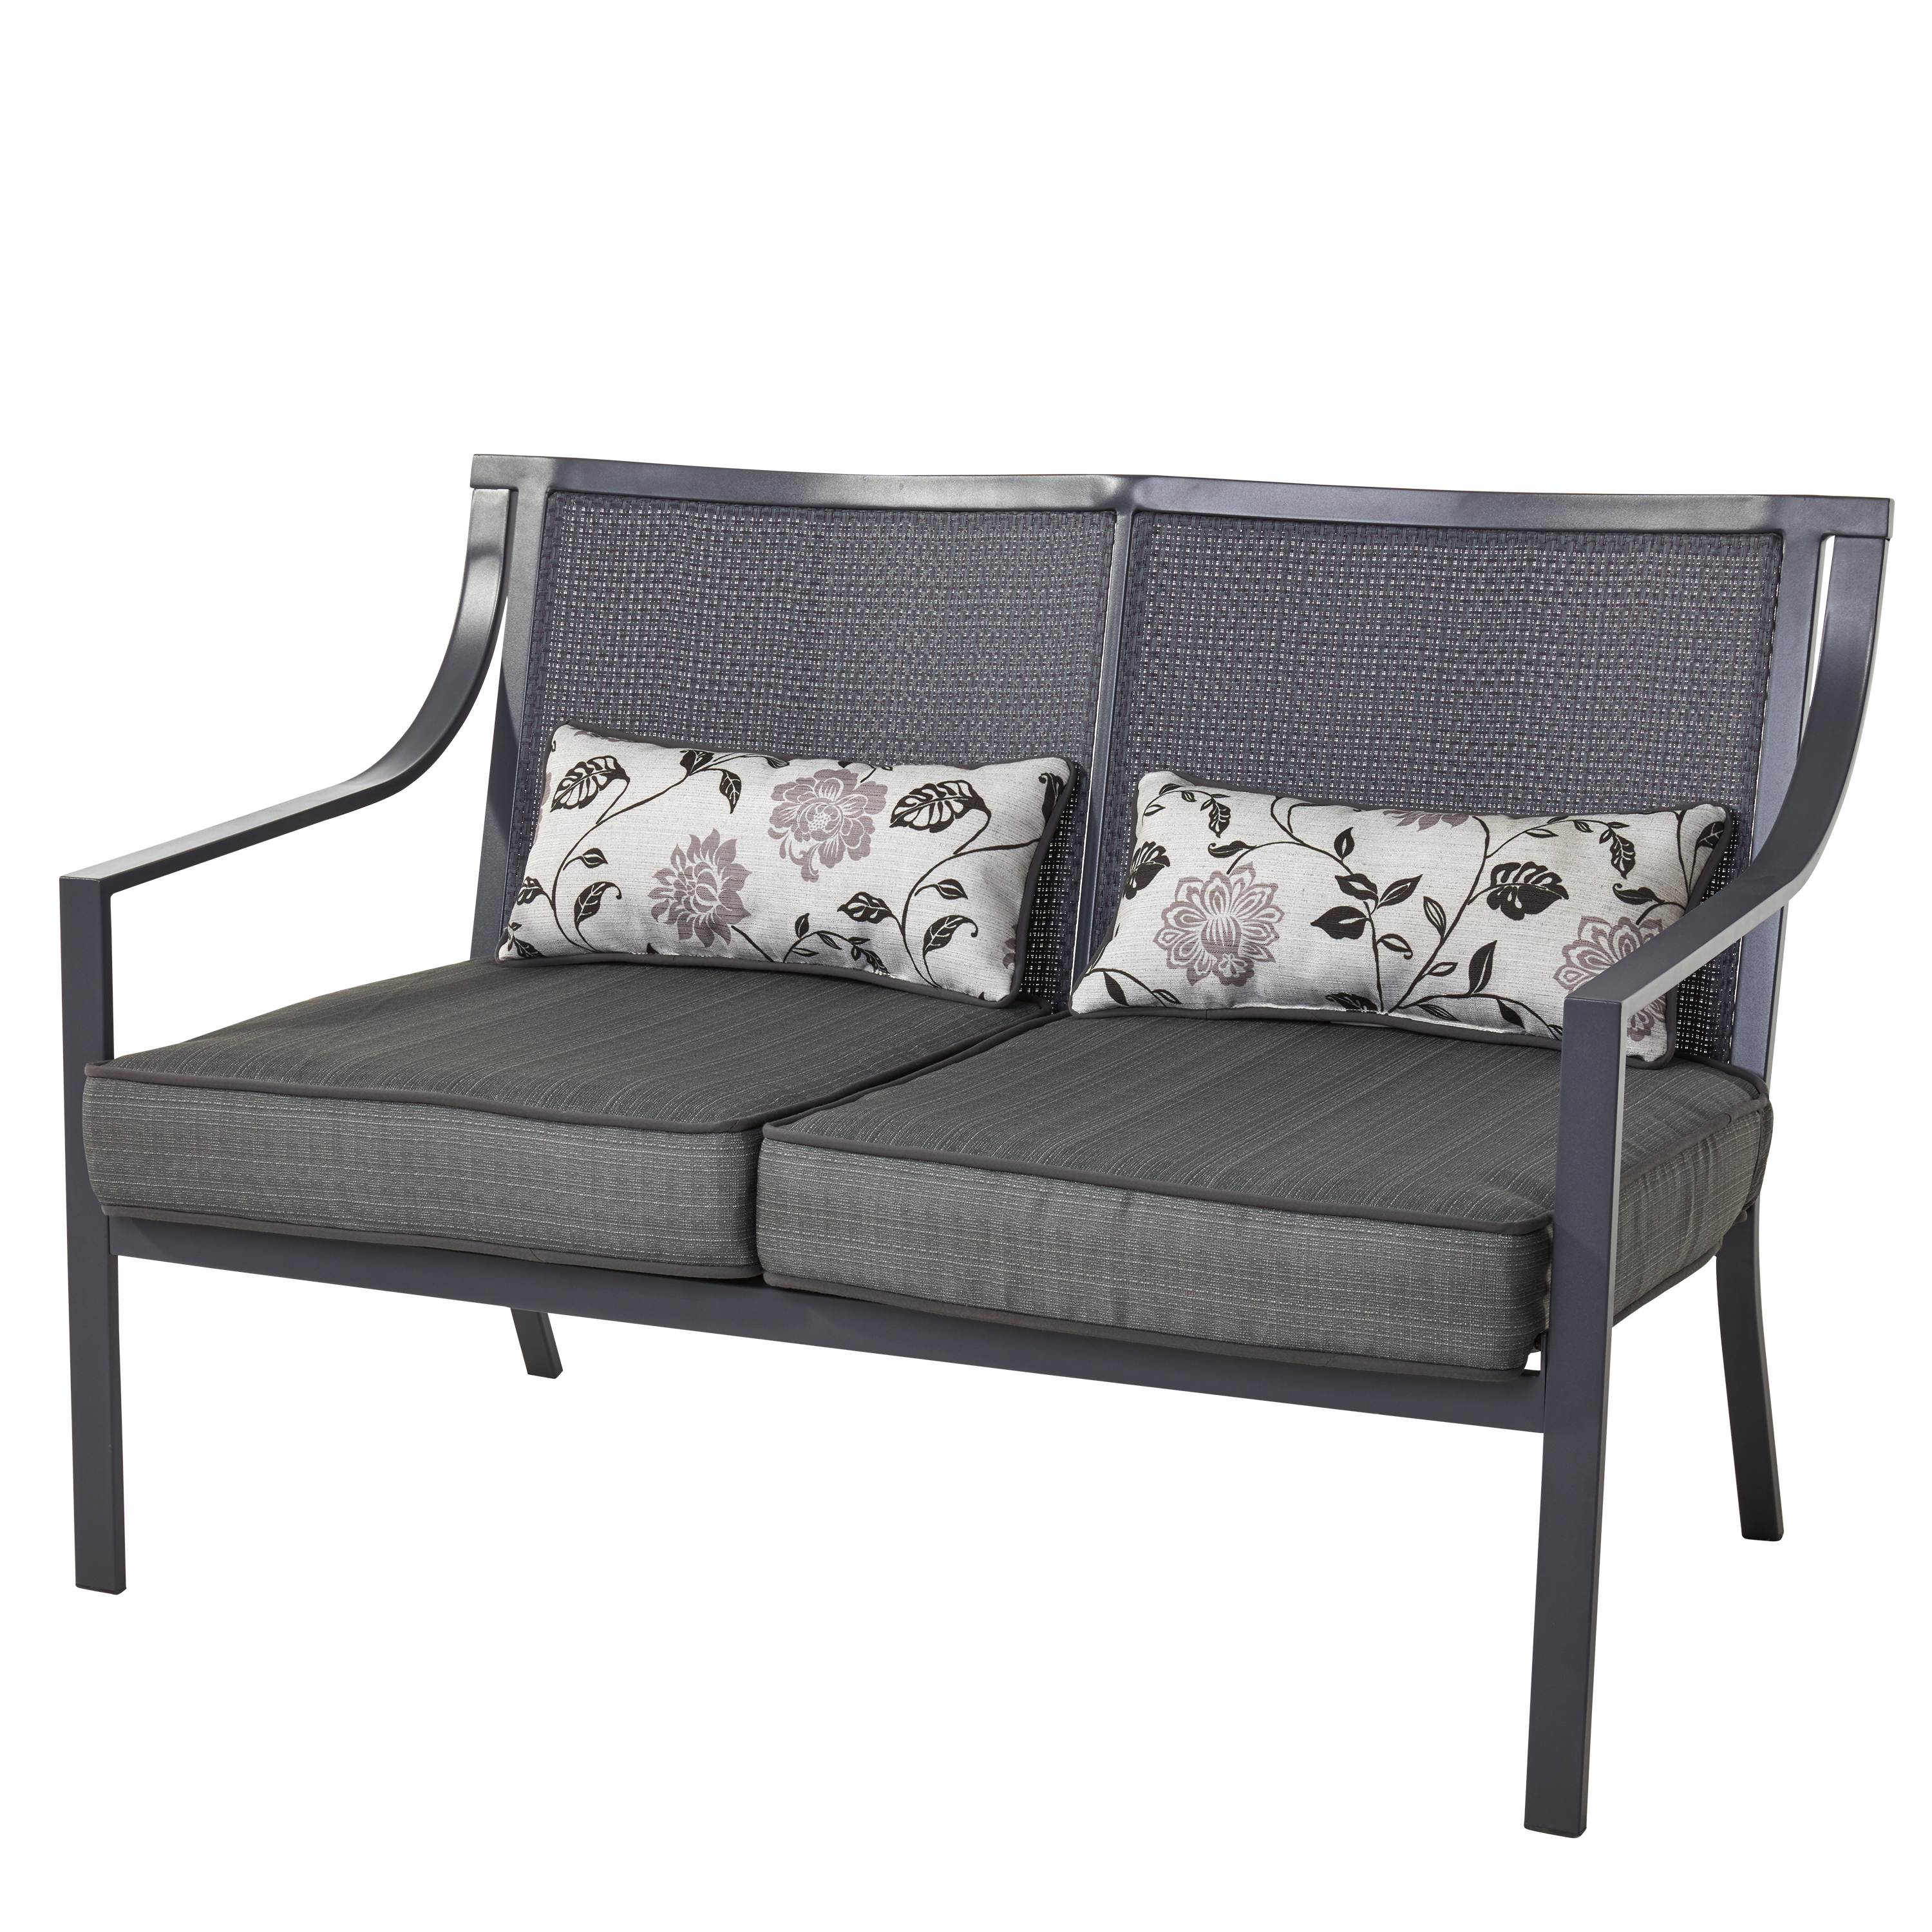 Mainstays Alexandra Square 4-Piece Patio Conversation Set, Grey with Leaves, Seats 4 with Gray Cushions - image 2 of 9